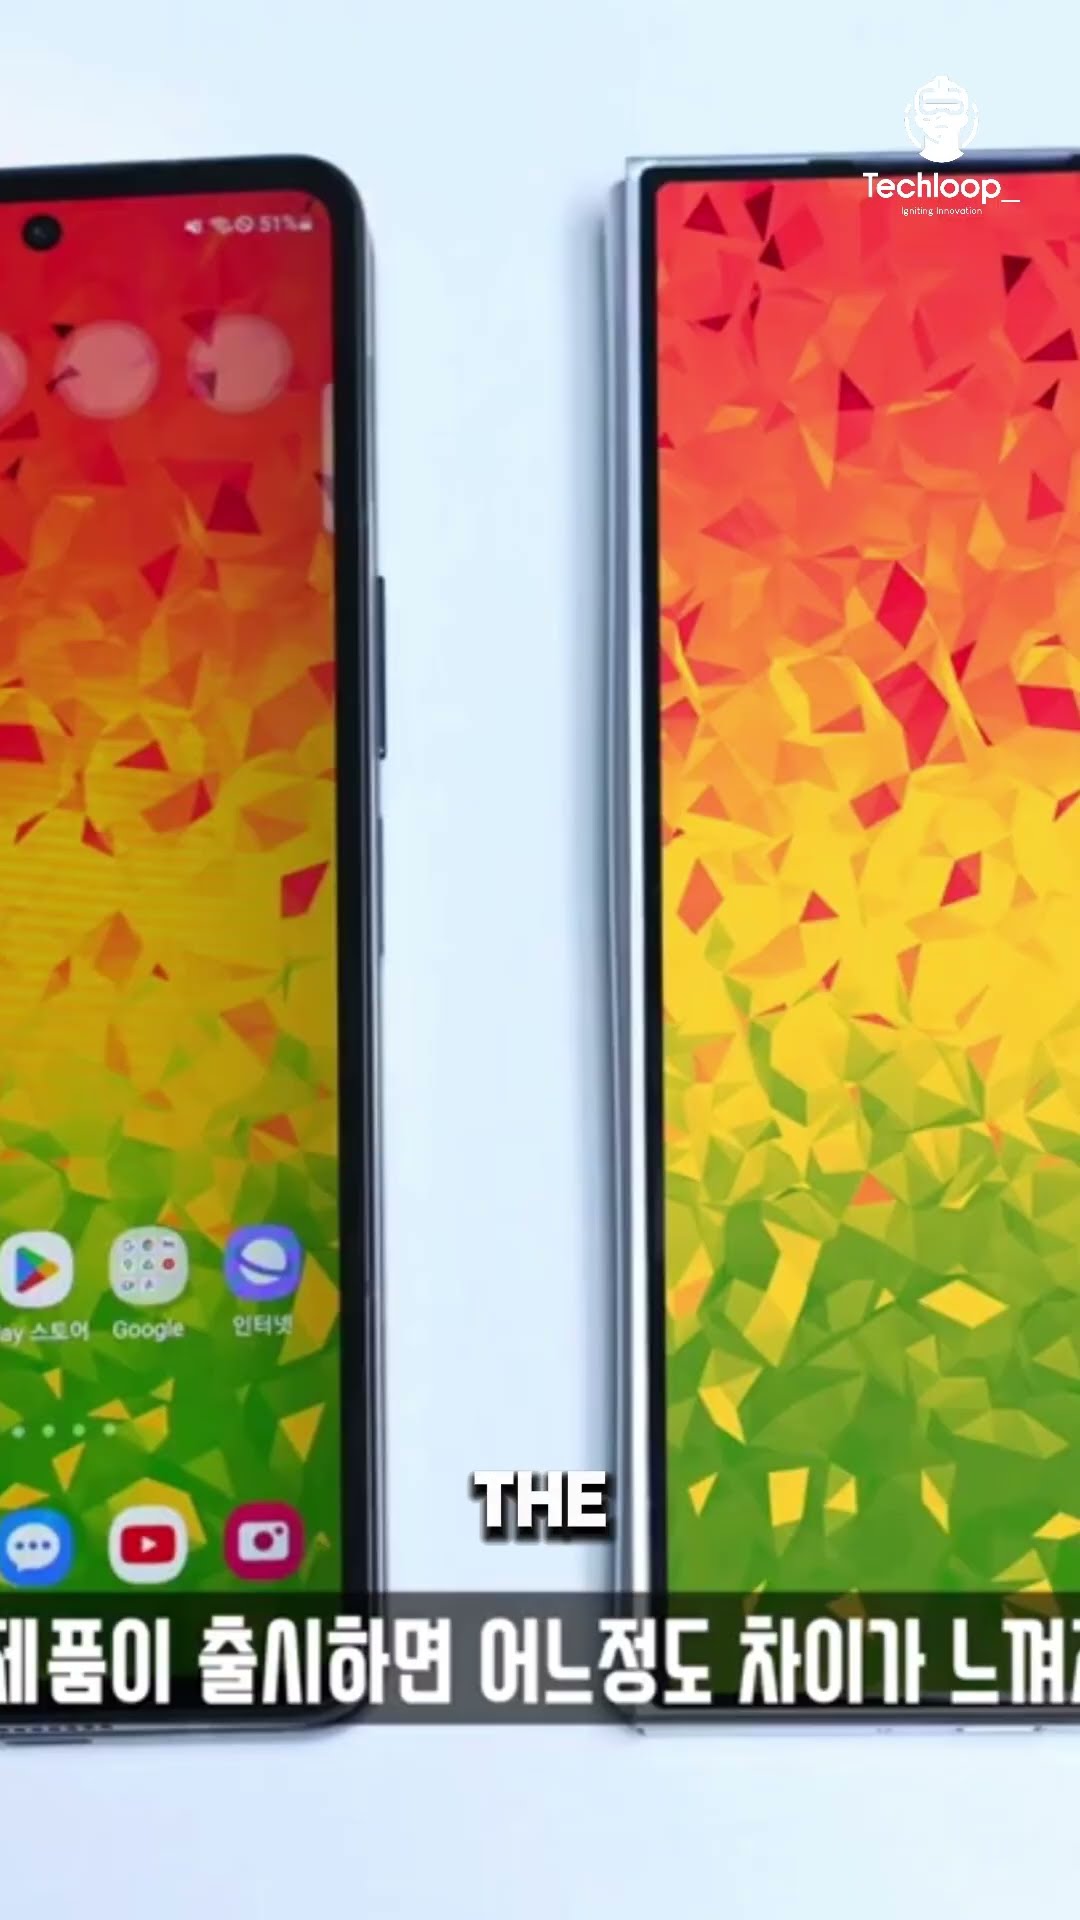 Rumors about the Galaxy Z Fold 6 and Z flip (watch 7 & Buds 3 pro) #samsunggalaxy #tech #smartphone